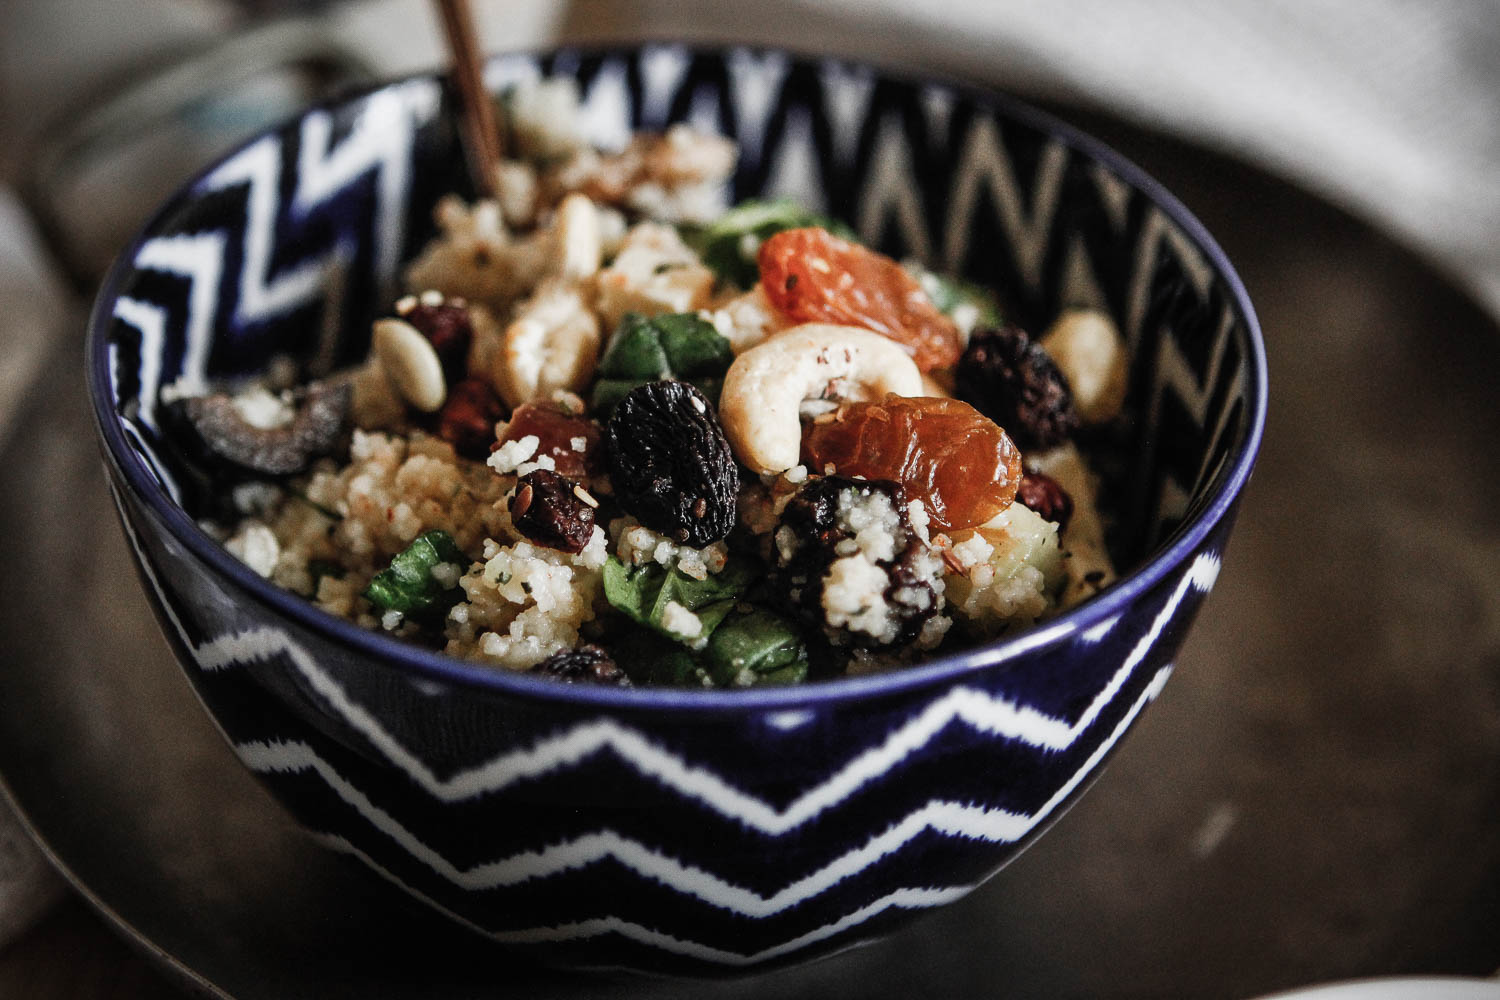 lauralamode-food-rezept-recipe-health-fitfood-fitness-oriental-orientalfood-couscous-couscous salad-fitnessfood-berlin-blogger-foodblogger-fitnessblogger